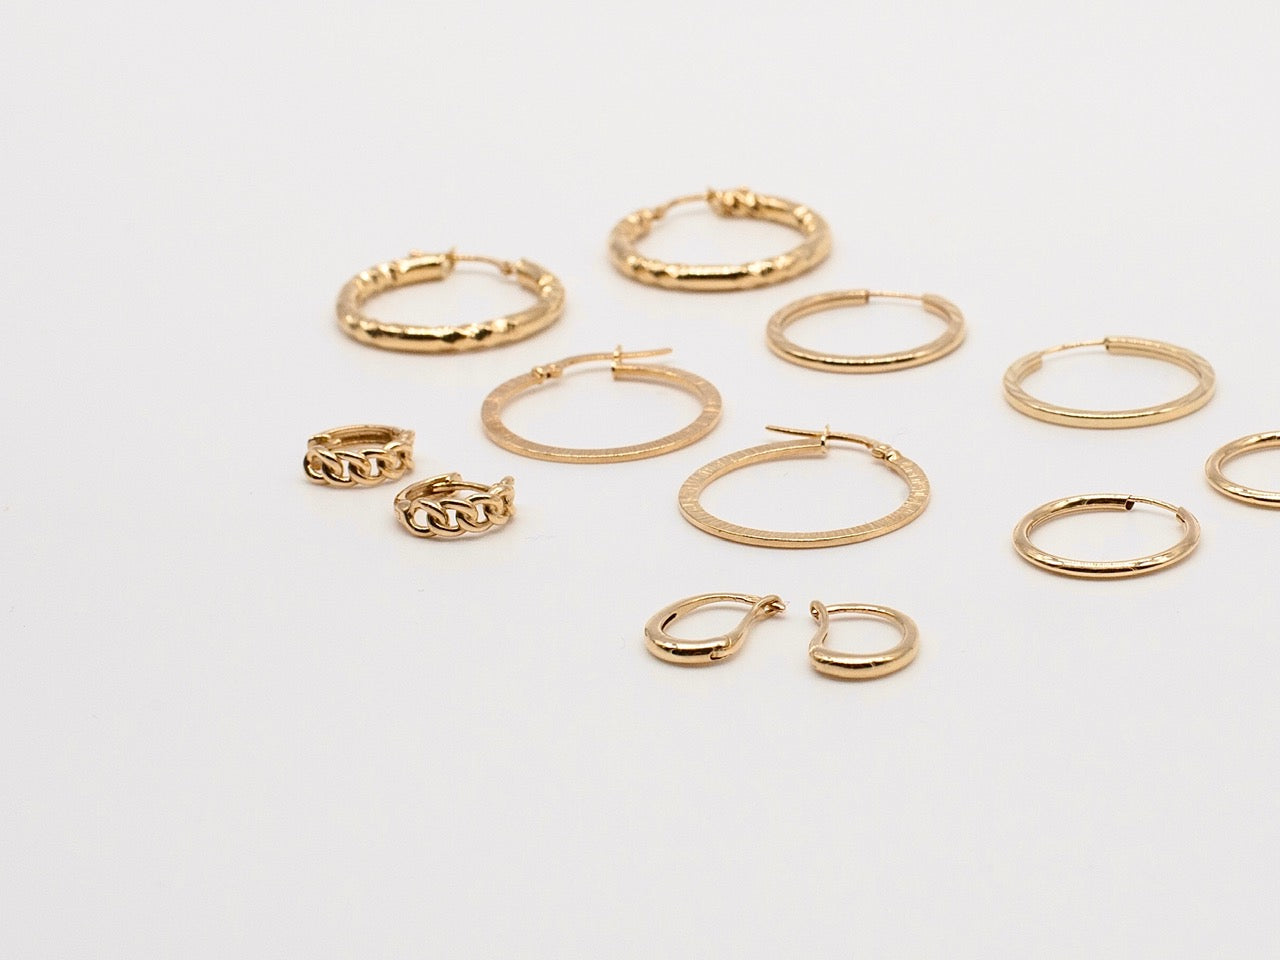 What's the difference between 9K and 14K gold jewelry?